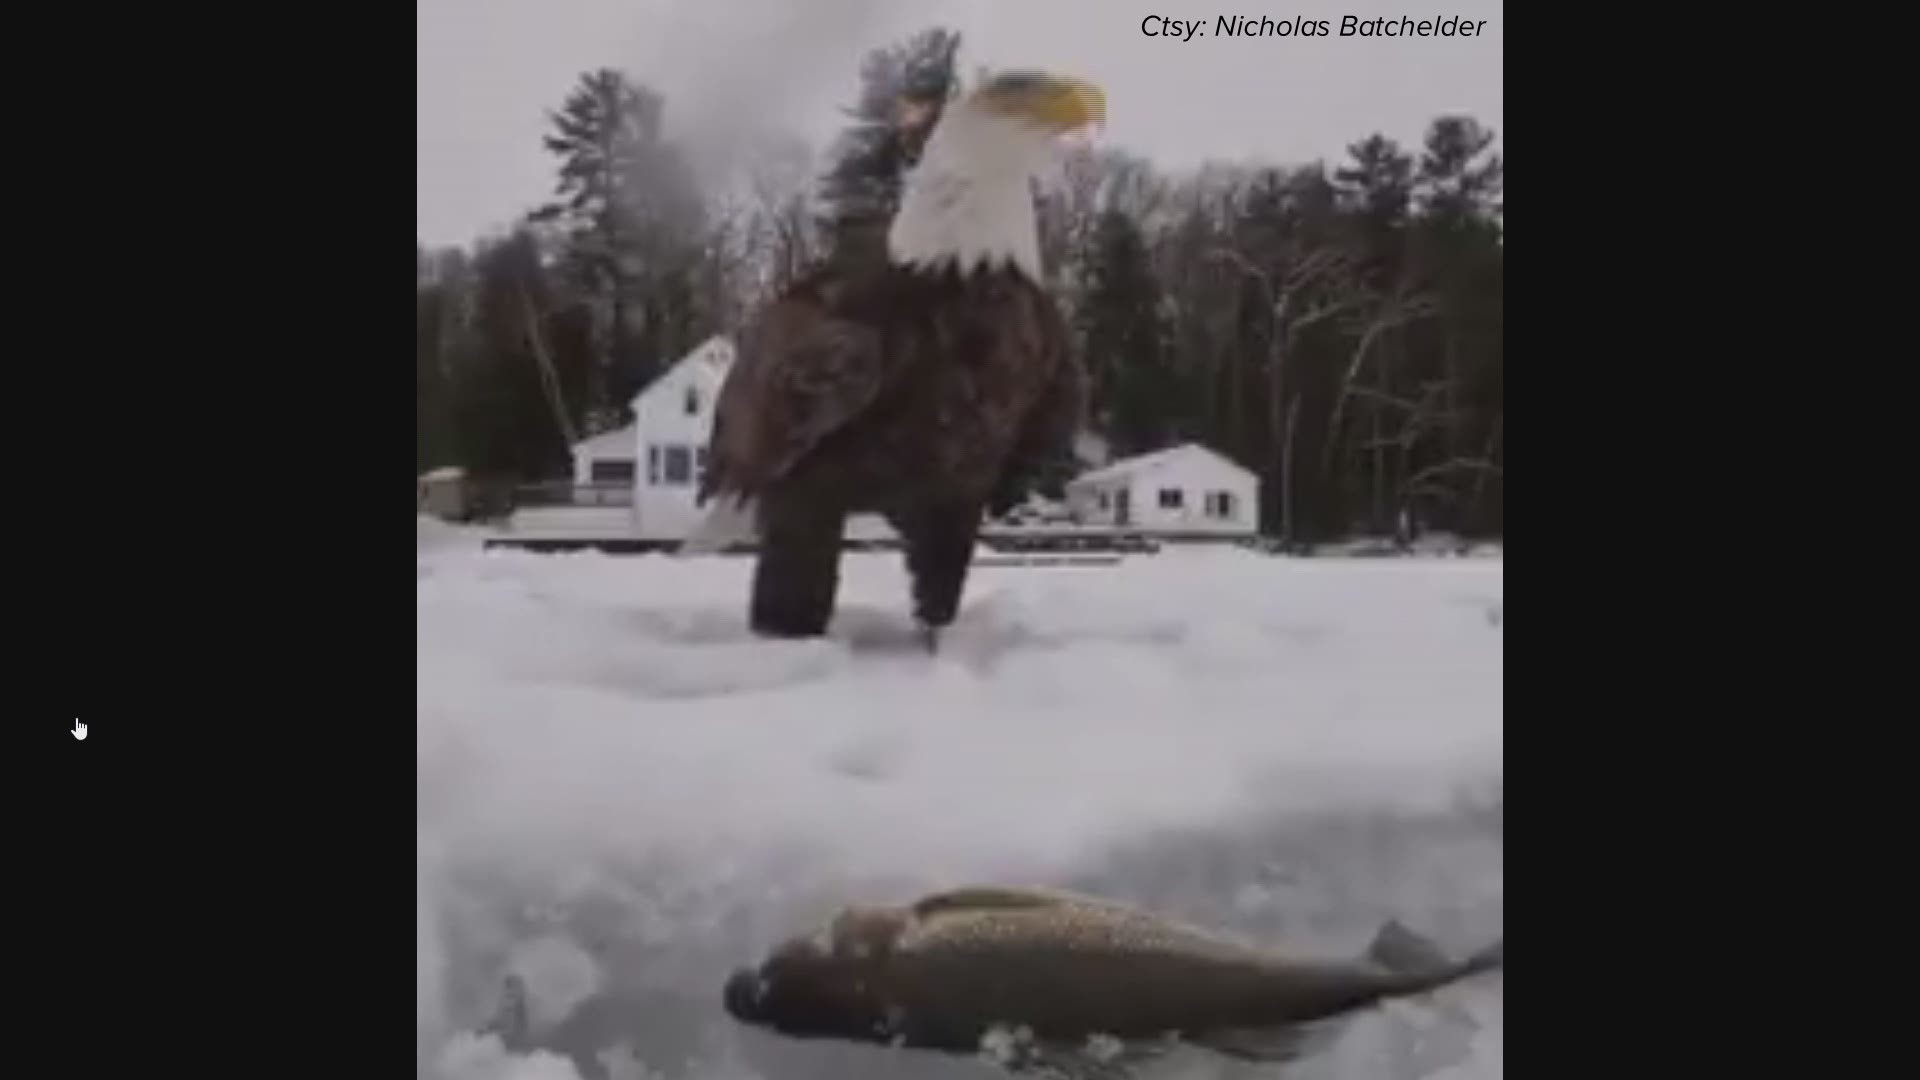 Nick Batchelder shares his catch with an eagle on Little Sebago.